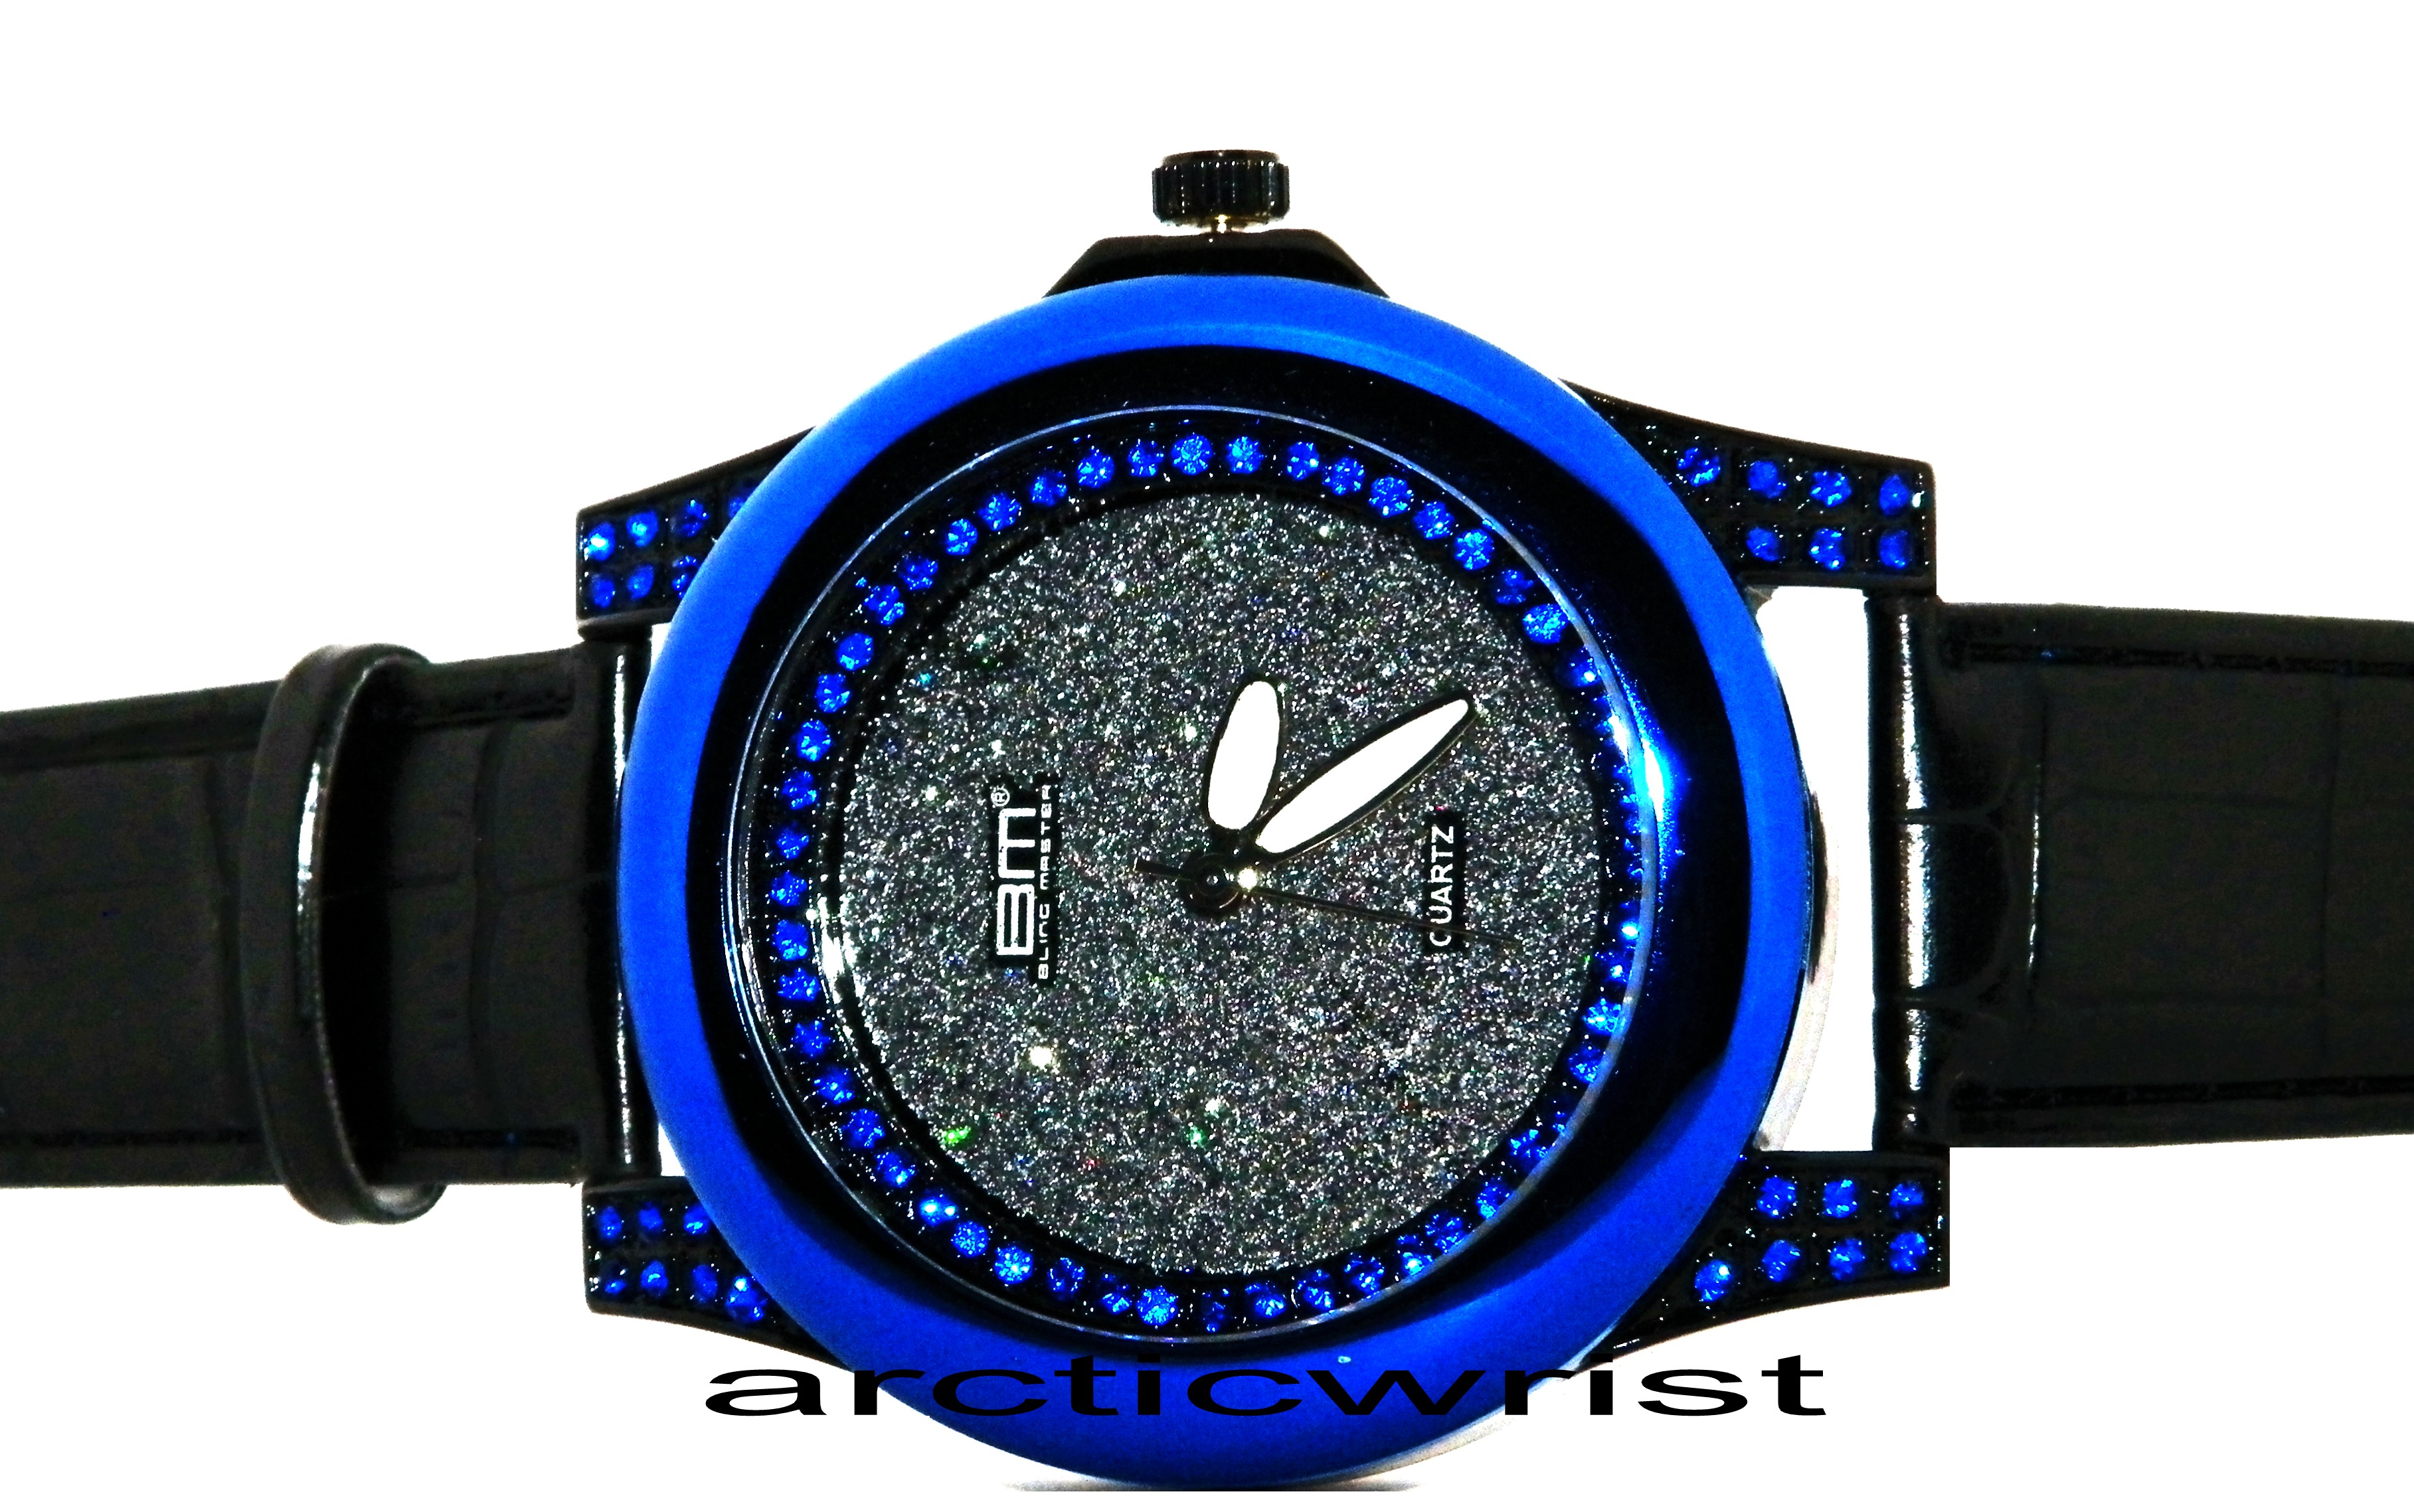 iced_out_watches_arcticwrist_com_dec29071.jpg